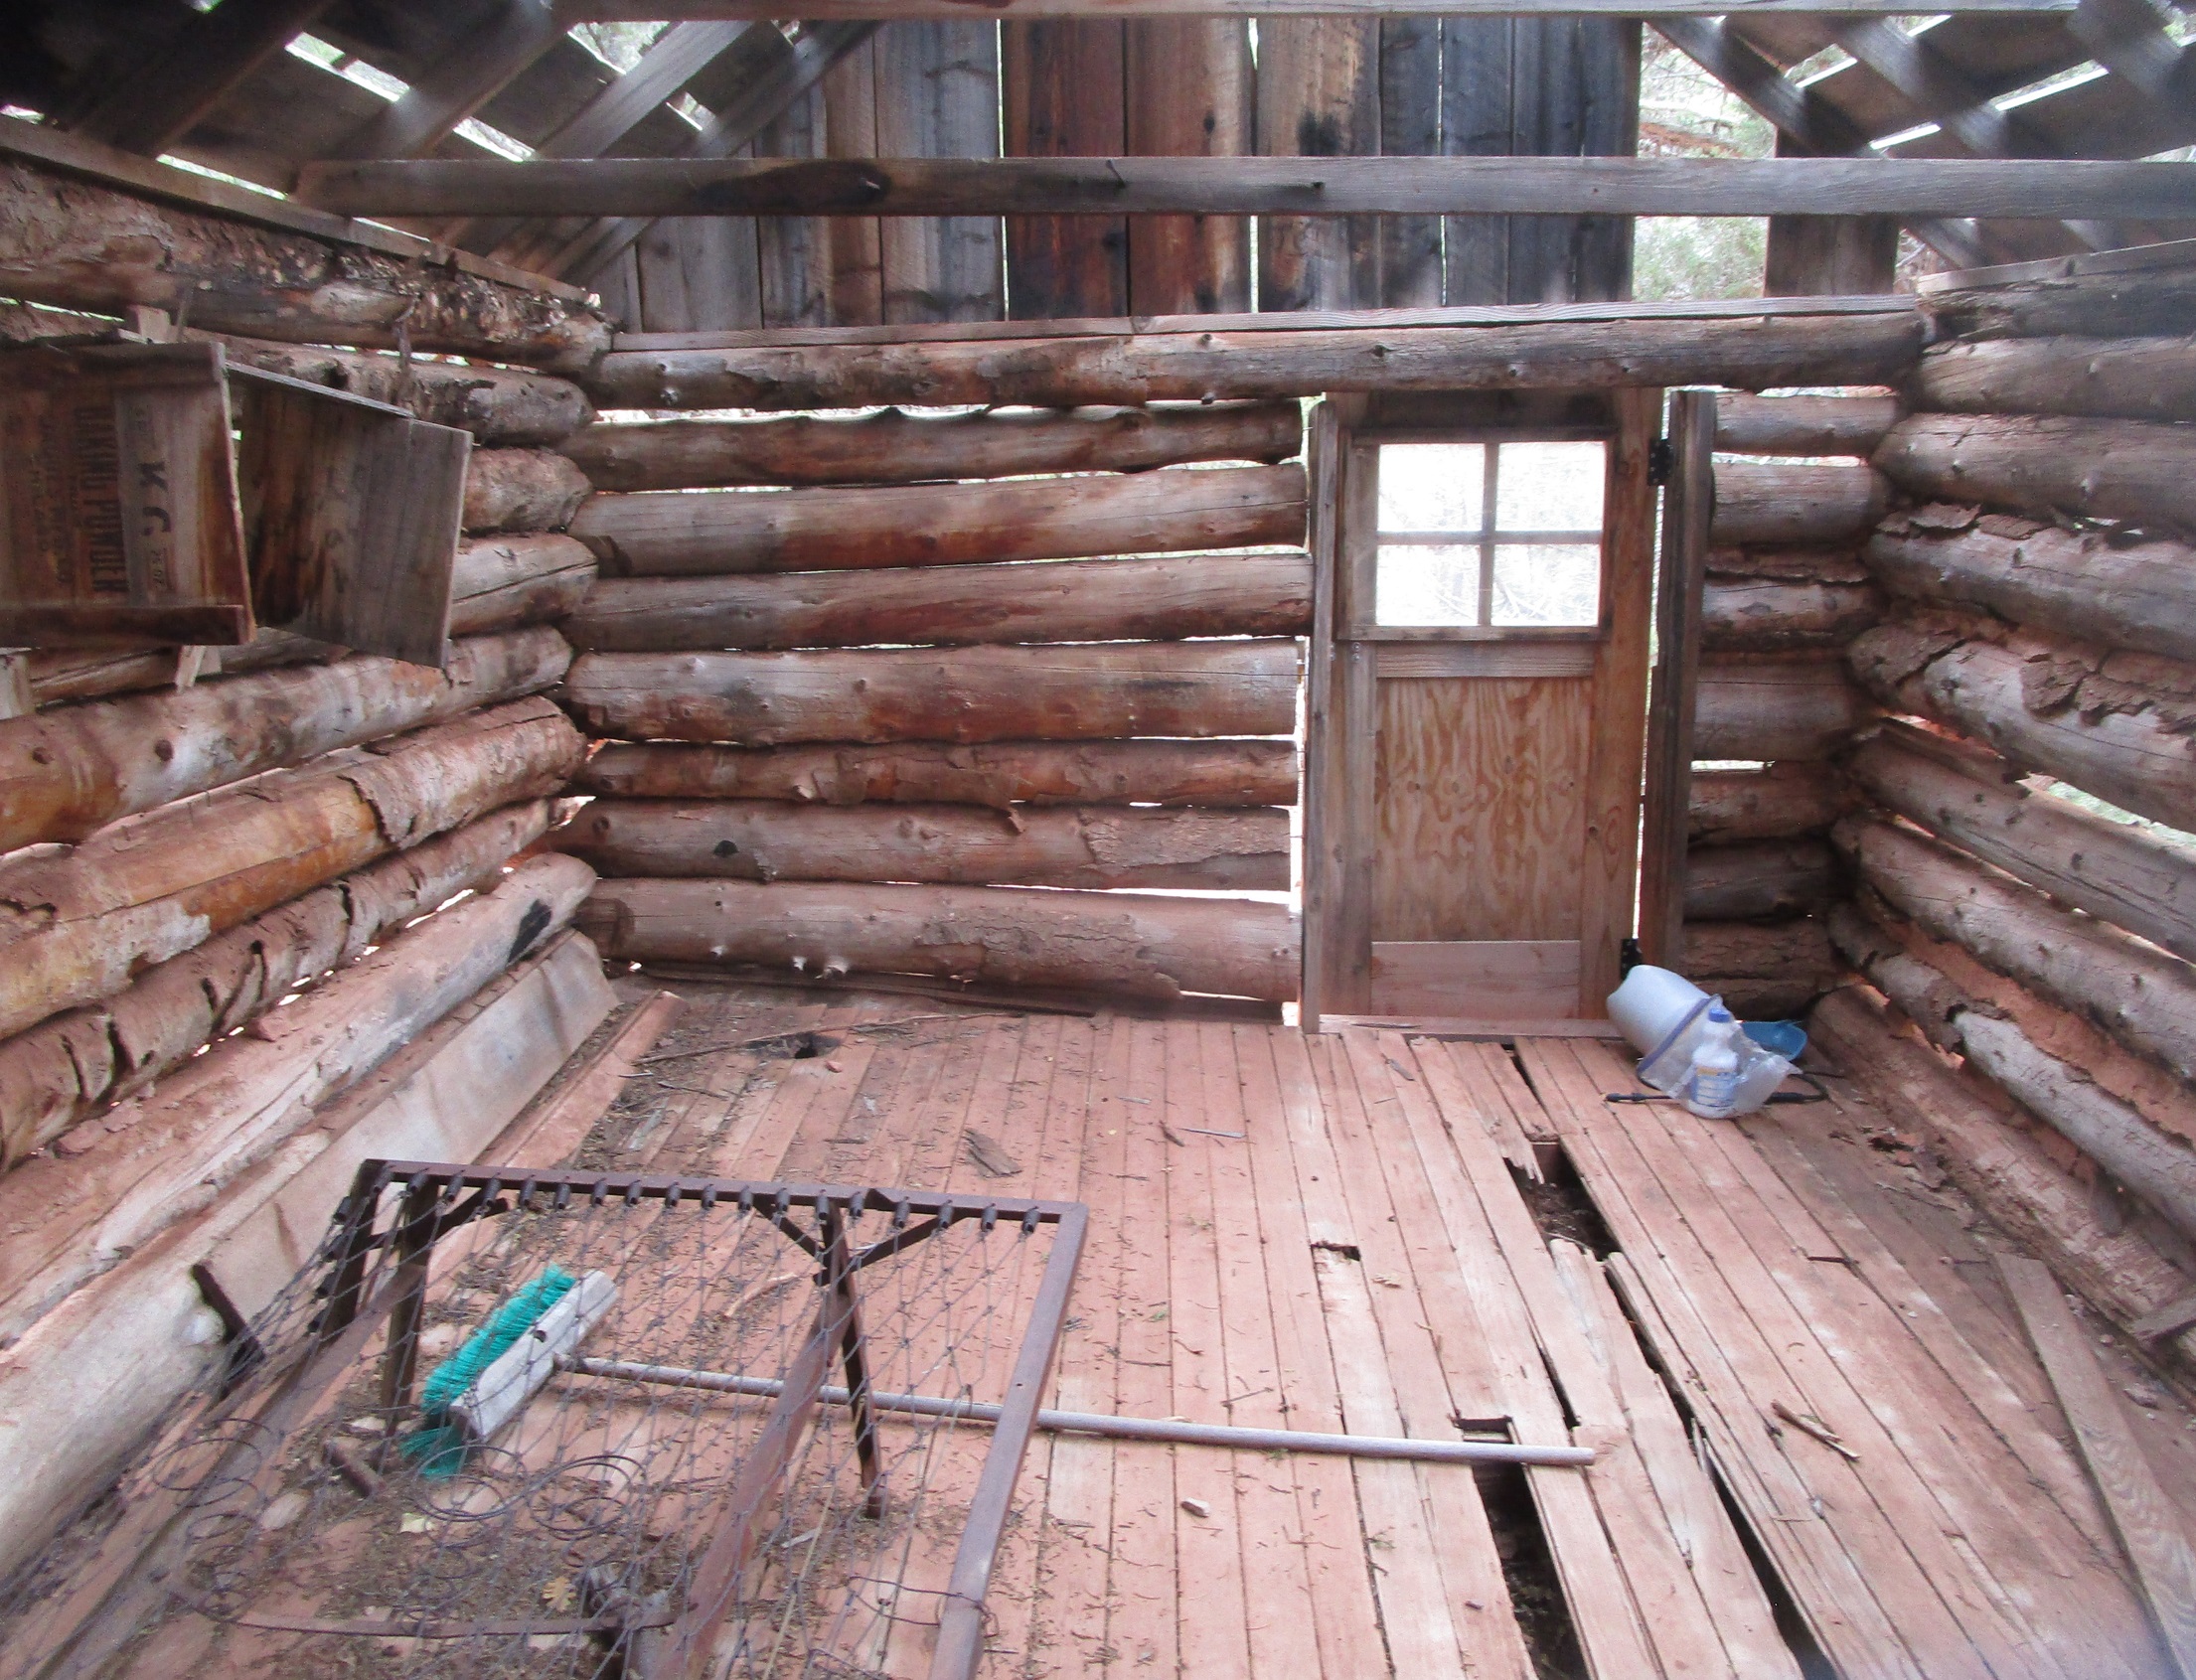 Inside of the old Larson Cabin in Zion National Park